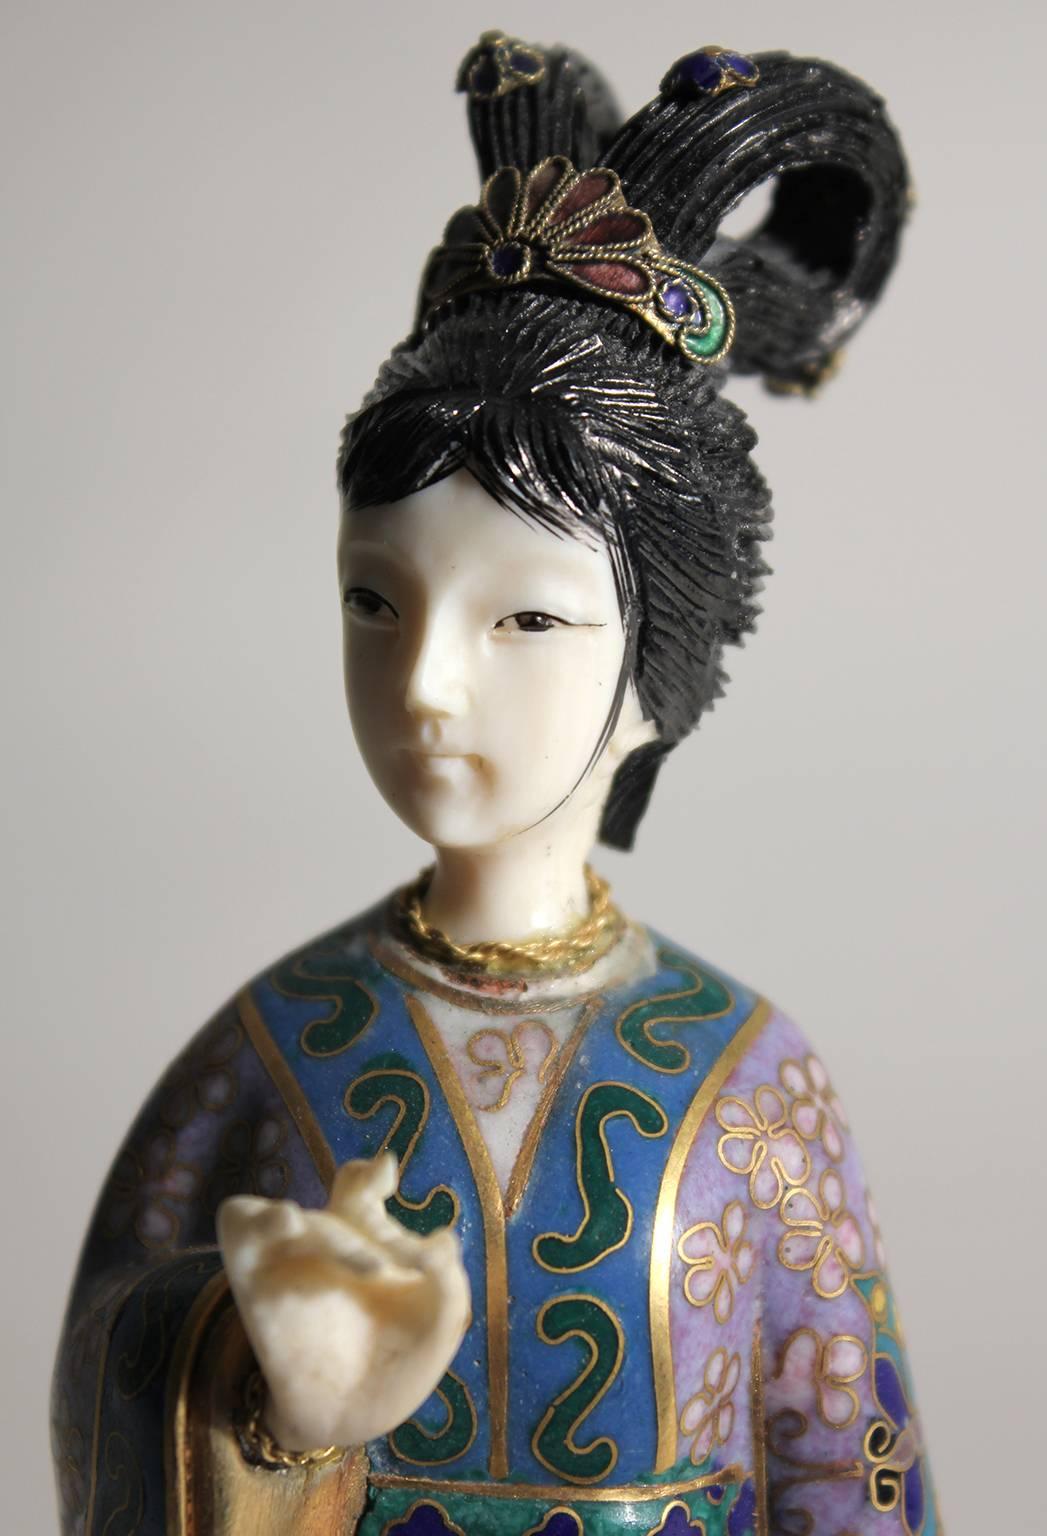 Antique Chinese Cloisonne Enameled Carved Guanyin Quan Yin Sculpture Figurine For Sale 2